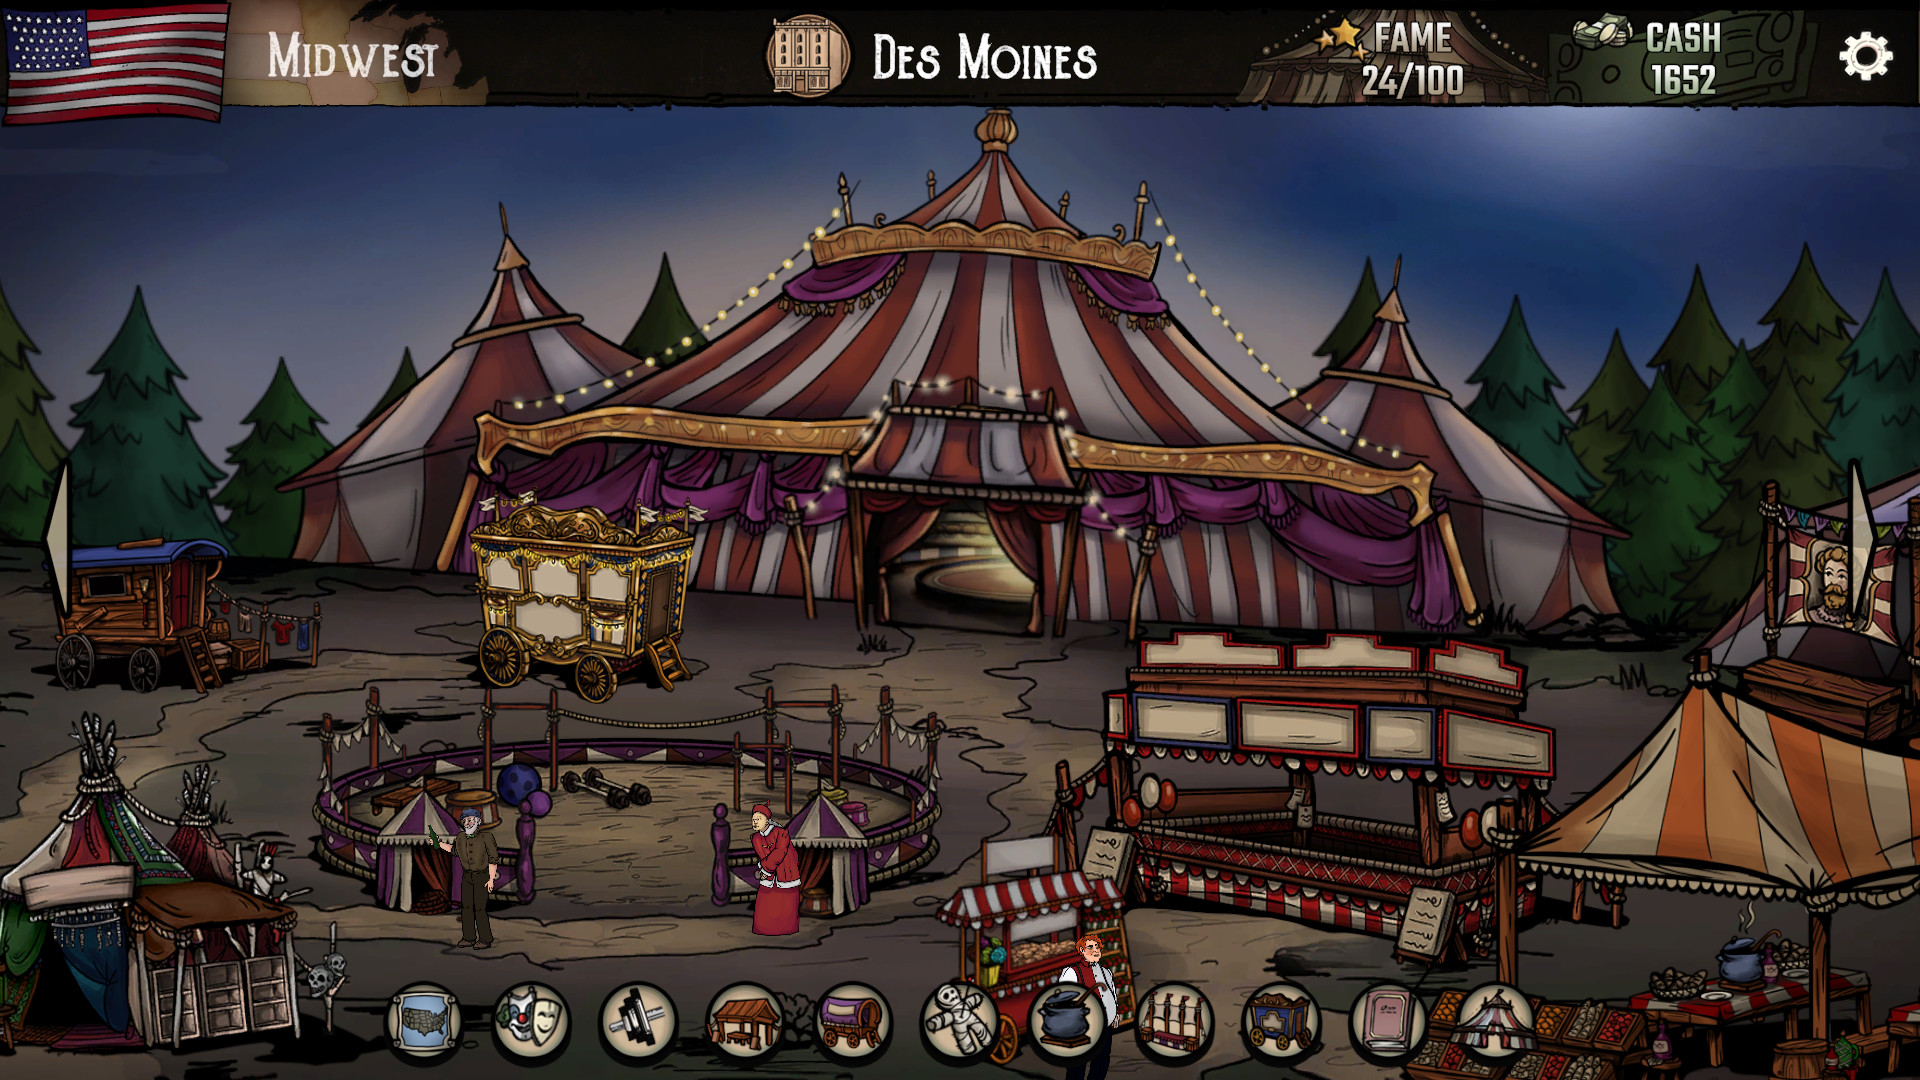 The Amazing American Circus: The Ringmaster's Edition Steam CD Key